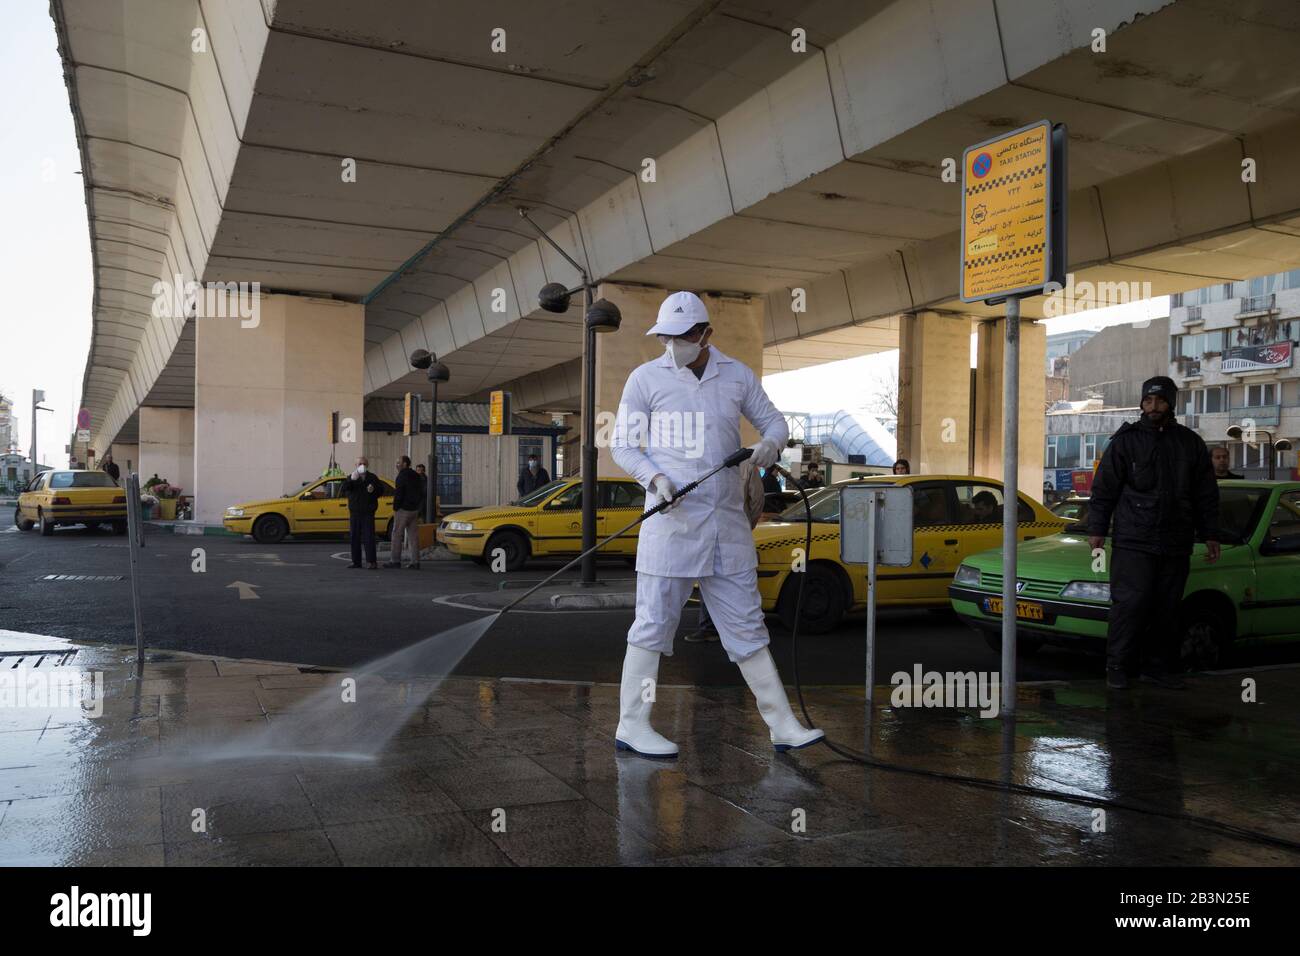 March 5, 2020, Tehran, Iran: Iranian firefighters and municipality workers disinfect a street because of the new coronavirus (COVID-19) in northern Tehran, Iran. Iran today reported 15 new deaths from the novel coronavirus and 591 fresh cases in the past 24 hours, bringing the toll to 107 dead and 3,513 infected. Iran has one of the highest death tolls in the world from the new coronavirus outside of China, the epicenter of the outbreak. (Credit Image: © Rouzbeh Fouladi/ZUMA Wire) Stock Photo